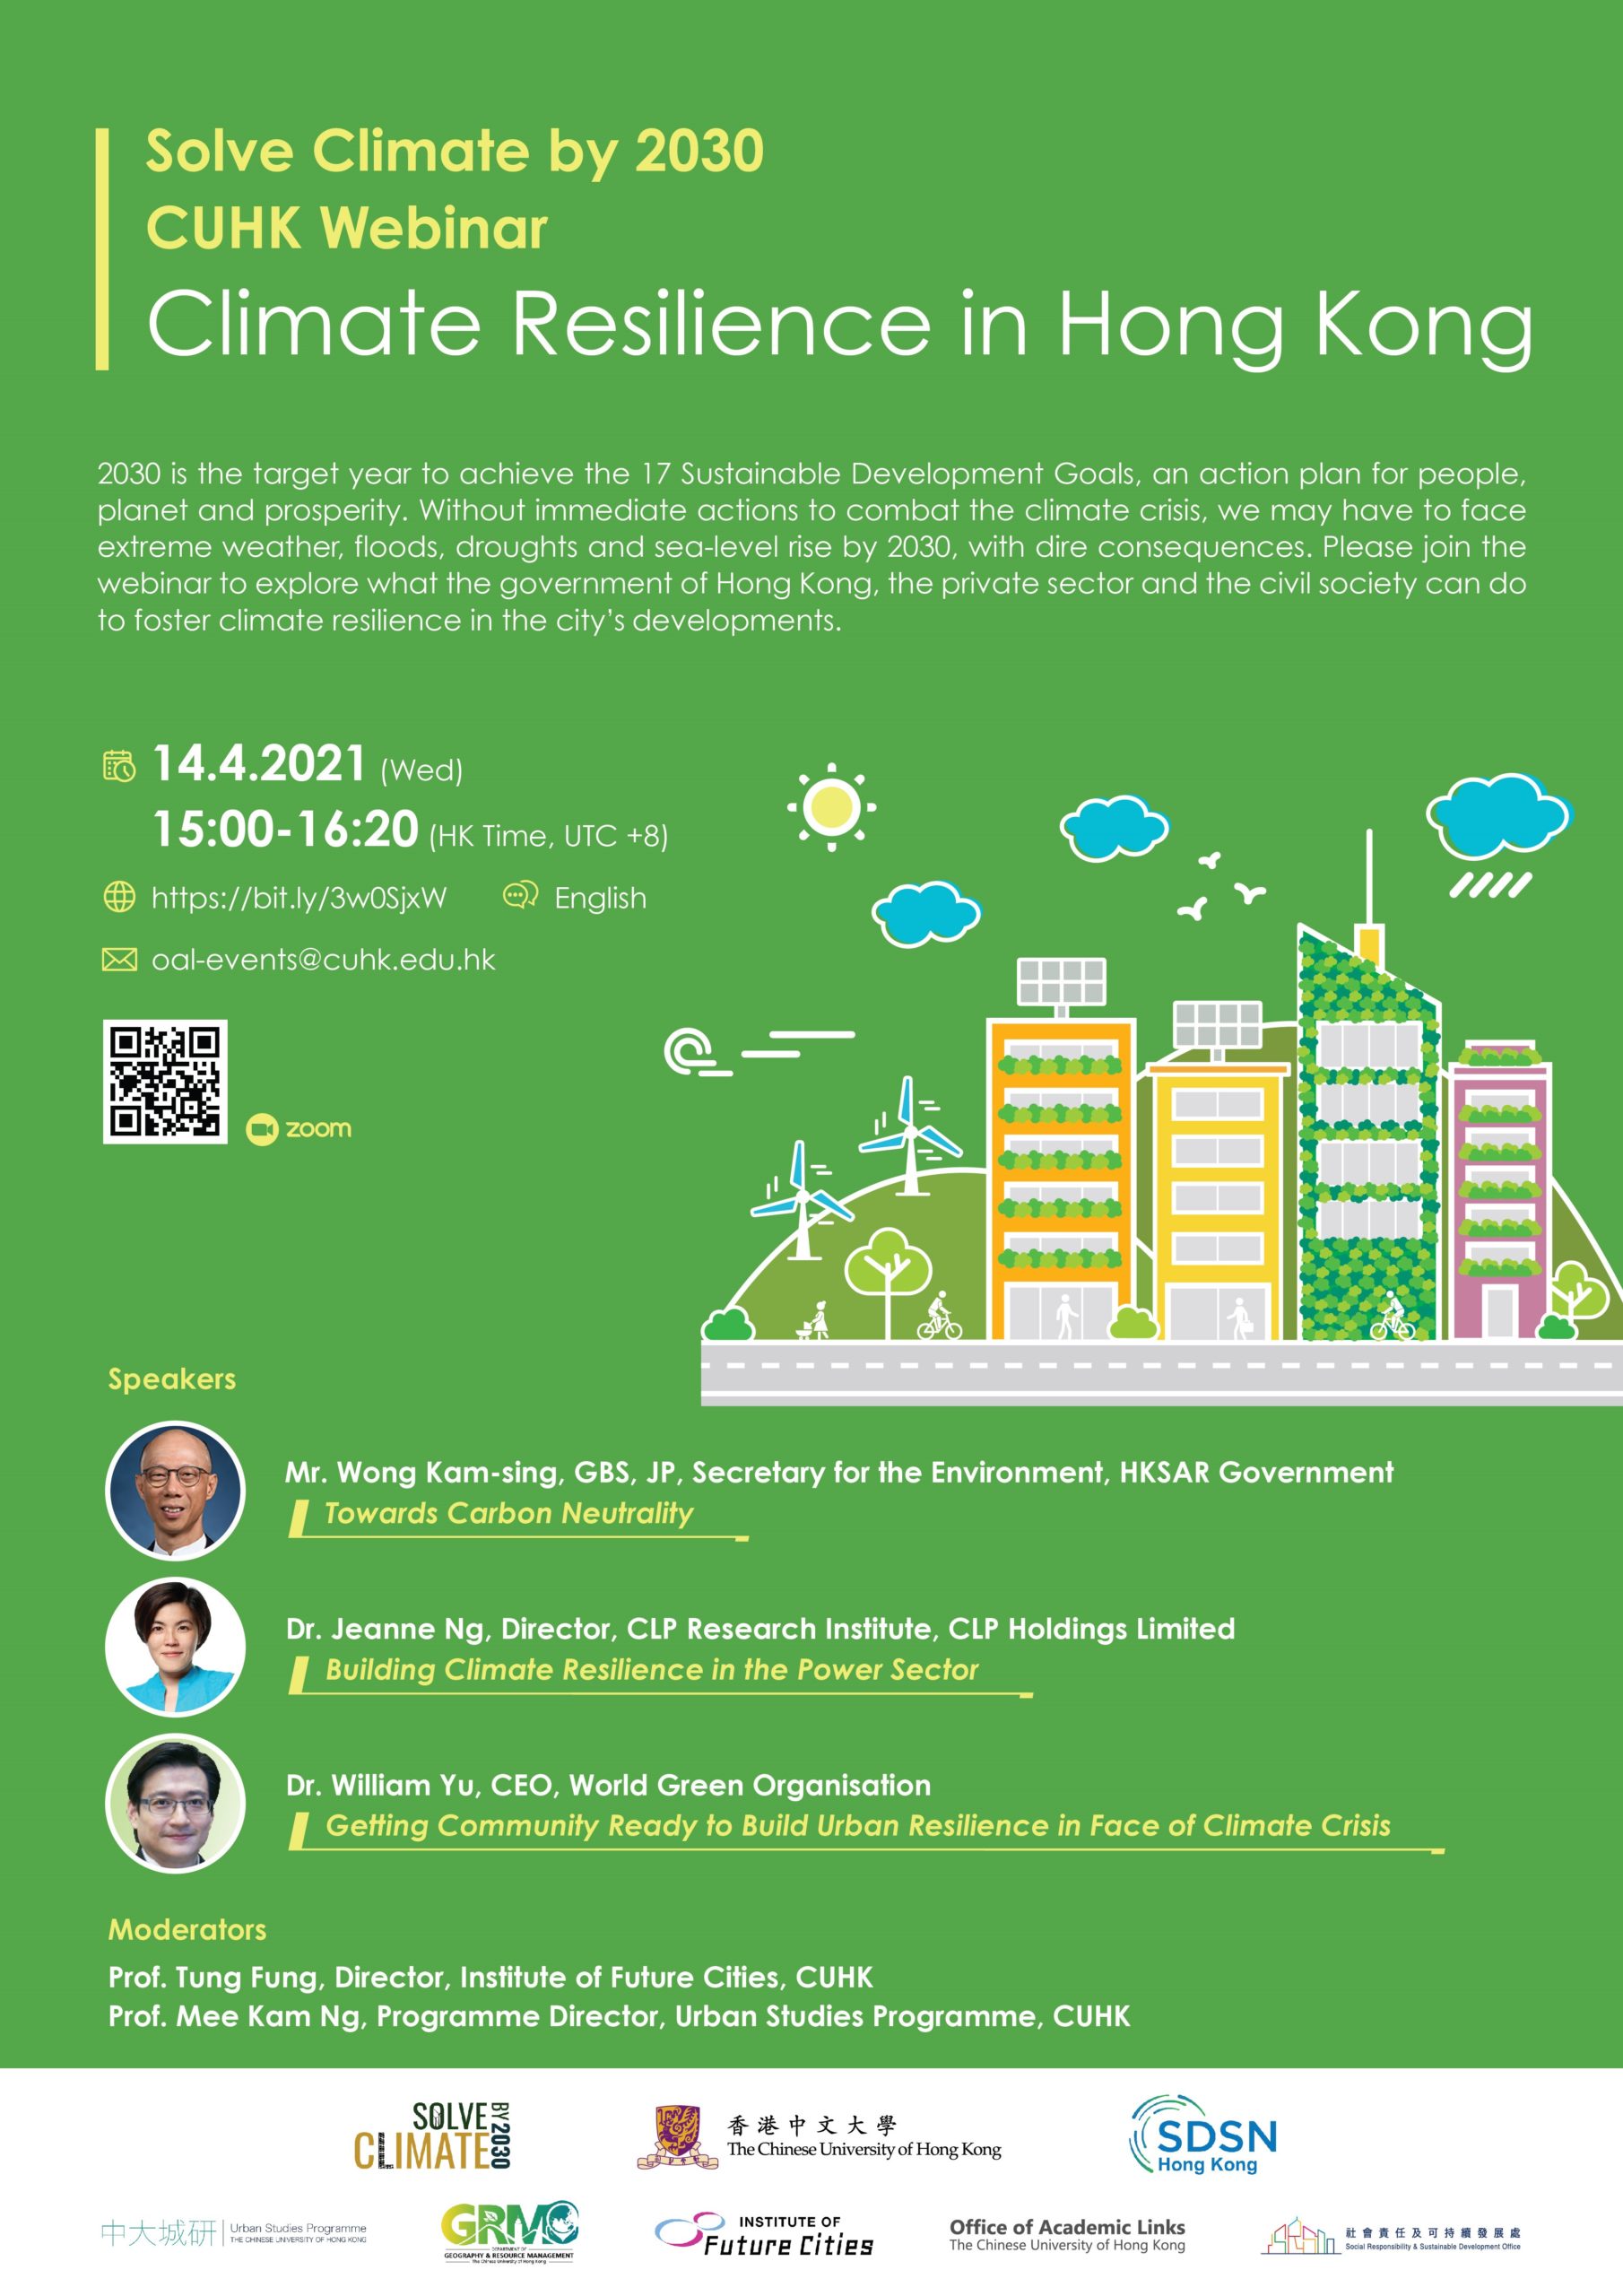 Solve Climate by 2030: CUHK Webinar ─ Climate Resilience in Hong Kong